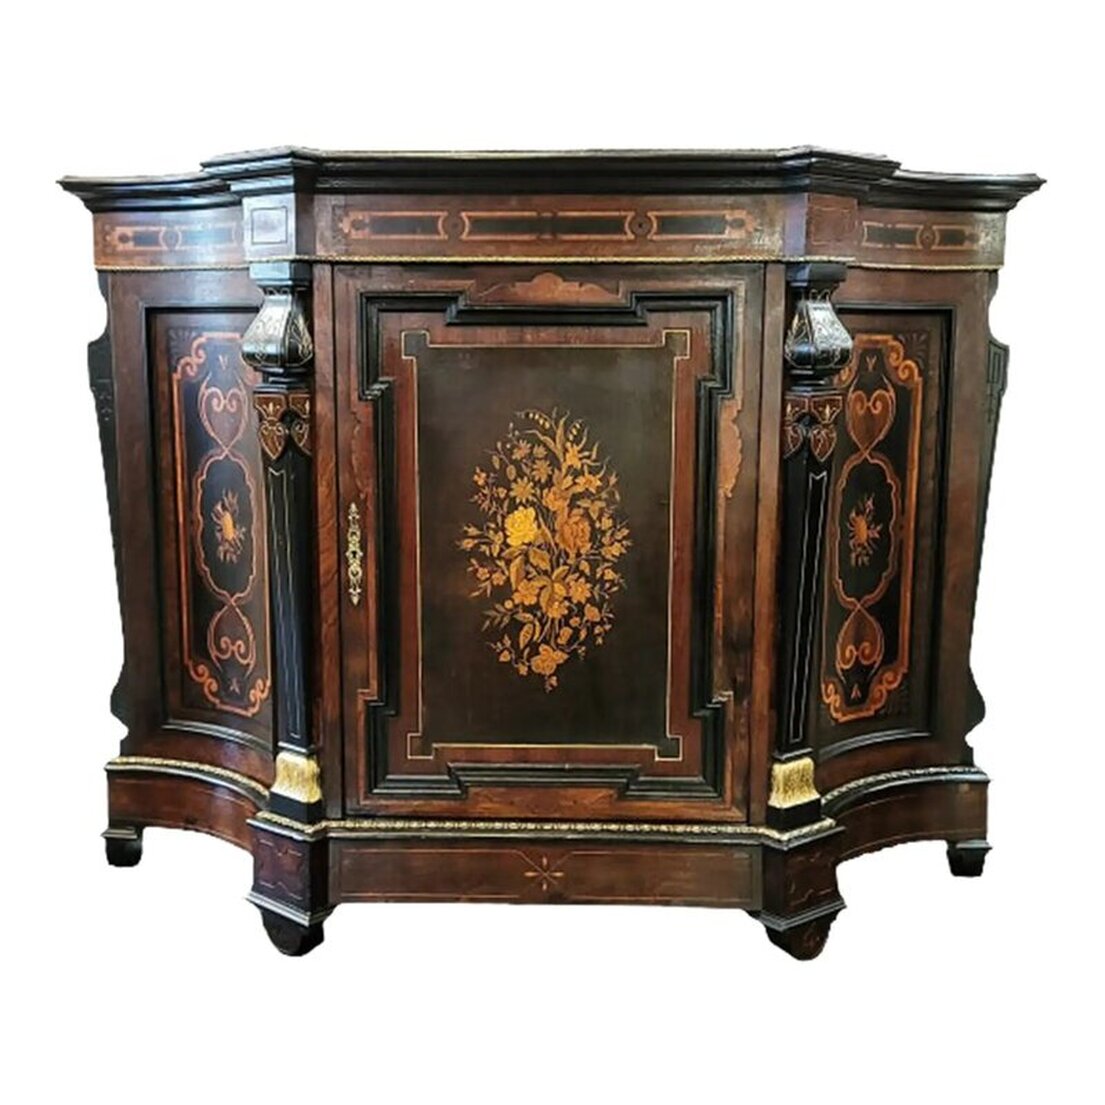 Victorian credenza and music cabinet has a shaped top with a molded edge enhanced with gilt bronze trim.  The frieze is decorated with marquetry strapwork. The bottom edge is enhanced with gilt bronze trim.  The case is made of maple wood with inlaid rosewood veneers and an ebony finish simulating Asian lacquer.  Two decorative supports are on the front of the credenza at either side of the single door cabinet at center. The supports are incised gilded and ebonized wood.  The central cabinet door is decorated with an intricate molded frame into which is set a rich marquetry panel of different exotic woods forming a bouquet of flowers. The interior of the door is paneled with birds-eye maple wood.  The inset hinges and lock are made of solid brass. The keyhole escutcheon on the door is in an openwork arabesque form.  The interior of the cabinet is paneled with maple wood and is fitted with a substantial solid maple wood removable shelf.  The concave side panels also feature rich marquetry motifs of musical instruments framed by anthemia.  Two more decorative supports are at each side back. They are incised and ebonized wood.  The base is shaped to reflect the top, has a molded top edge enhanced with gilt bronze trim, and an incised apron.  The four demi-lune feet are placed under molded top edges and feature incised decoration.  The back is framed panel constructed with an ebonized finish. Available from India Street Antiques, San Diego.